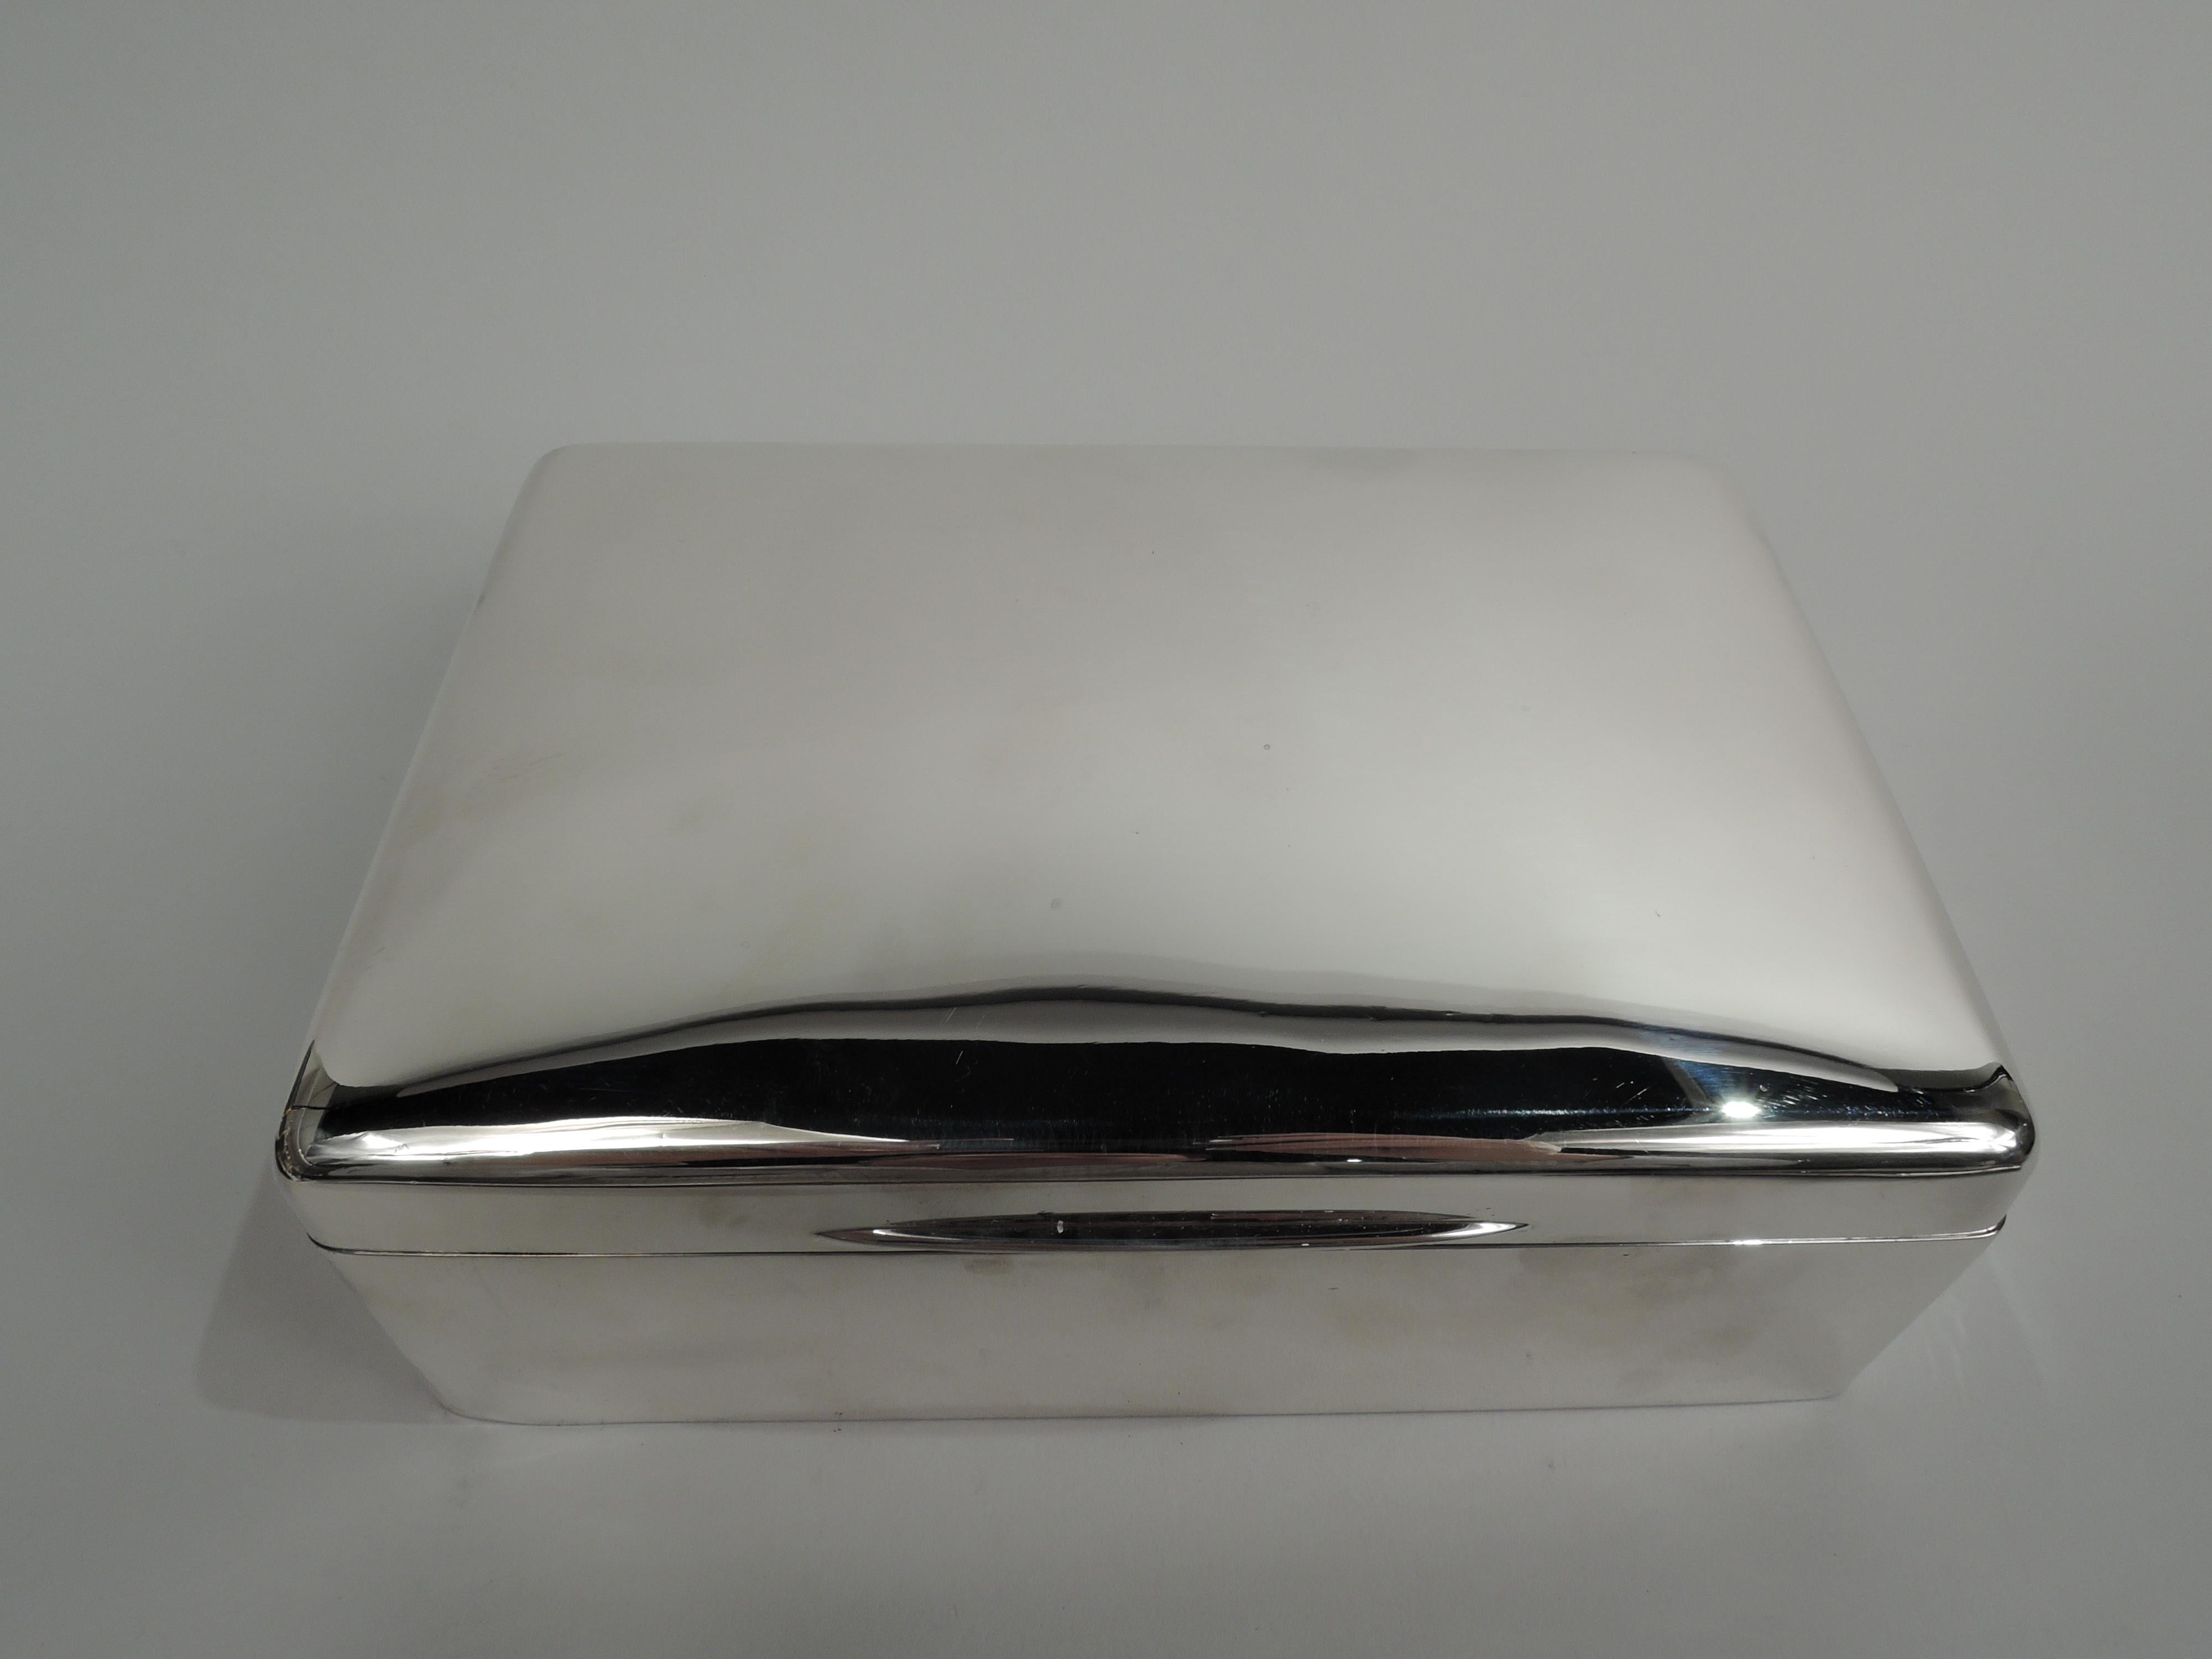 Large English Edwardian Modern sterling silver box, 1903. Rectangular with straight sides and curved corners. Cover flat and hinged with tapering tab. Box interior cedar-lined and -partitioned. Cover interior gilt-washed. Box underside